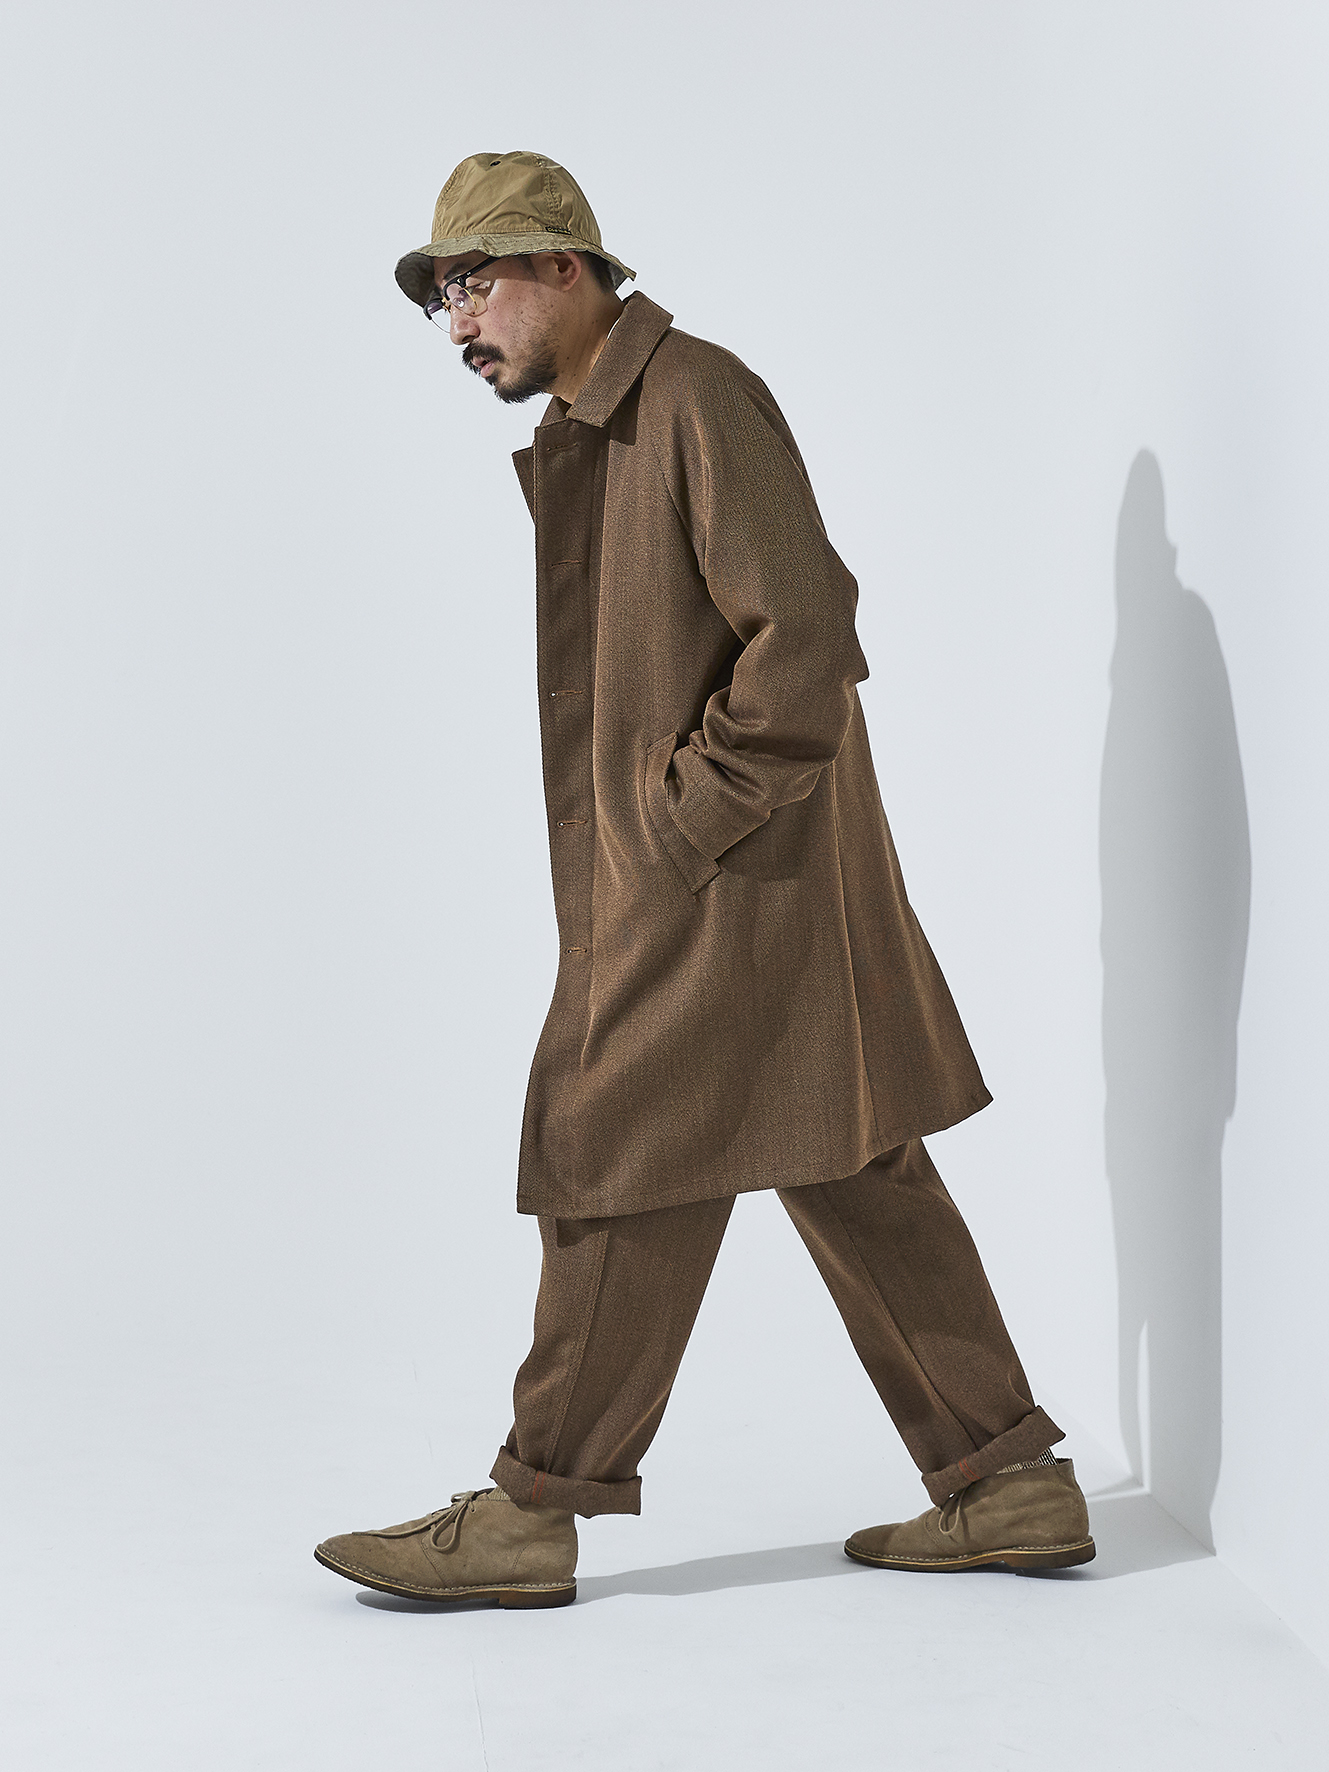 CORONA・UP DUSTER COAT x FATIGUE SLACKS in 2020FW STYLE | SPECIAL